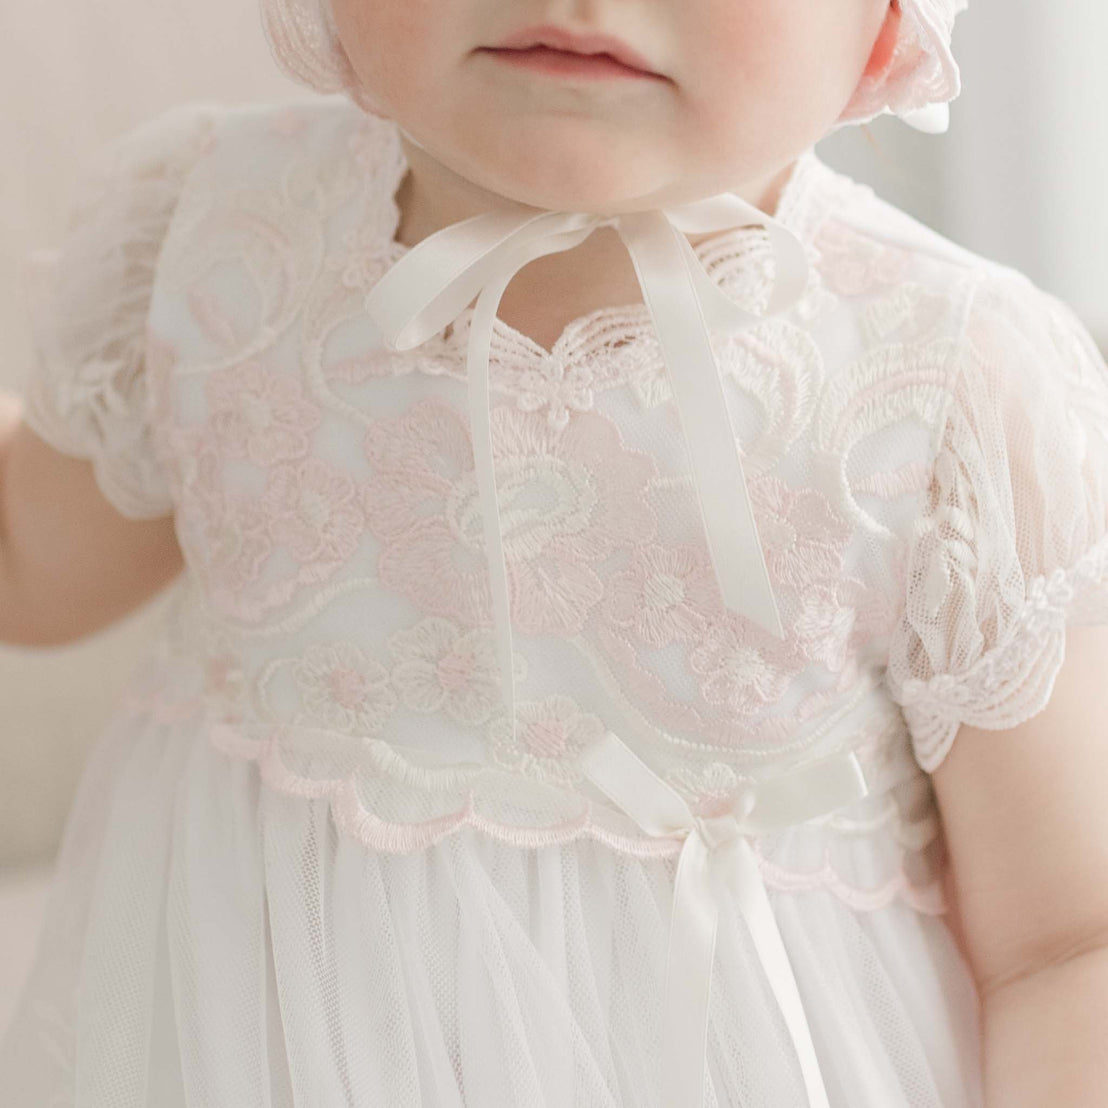 A close-up of a baby in a Joli Christening Gown with short sleeves and a ribbon tied in a bow at the waist, focusing on the detailed fabric and bow.